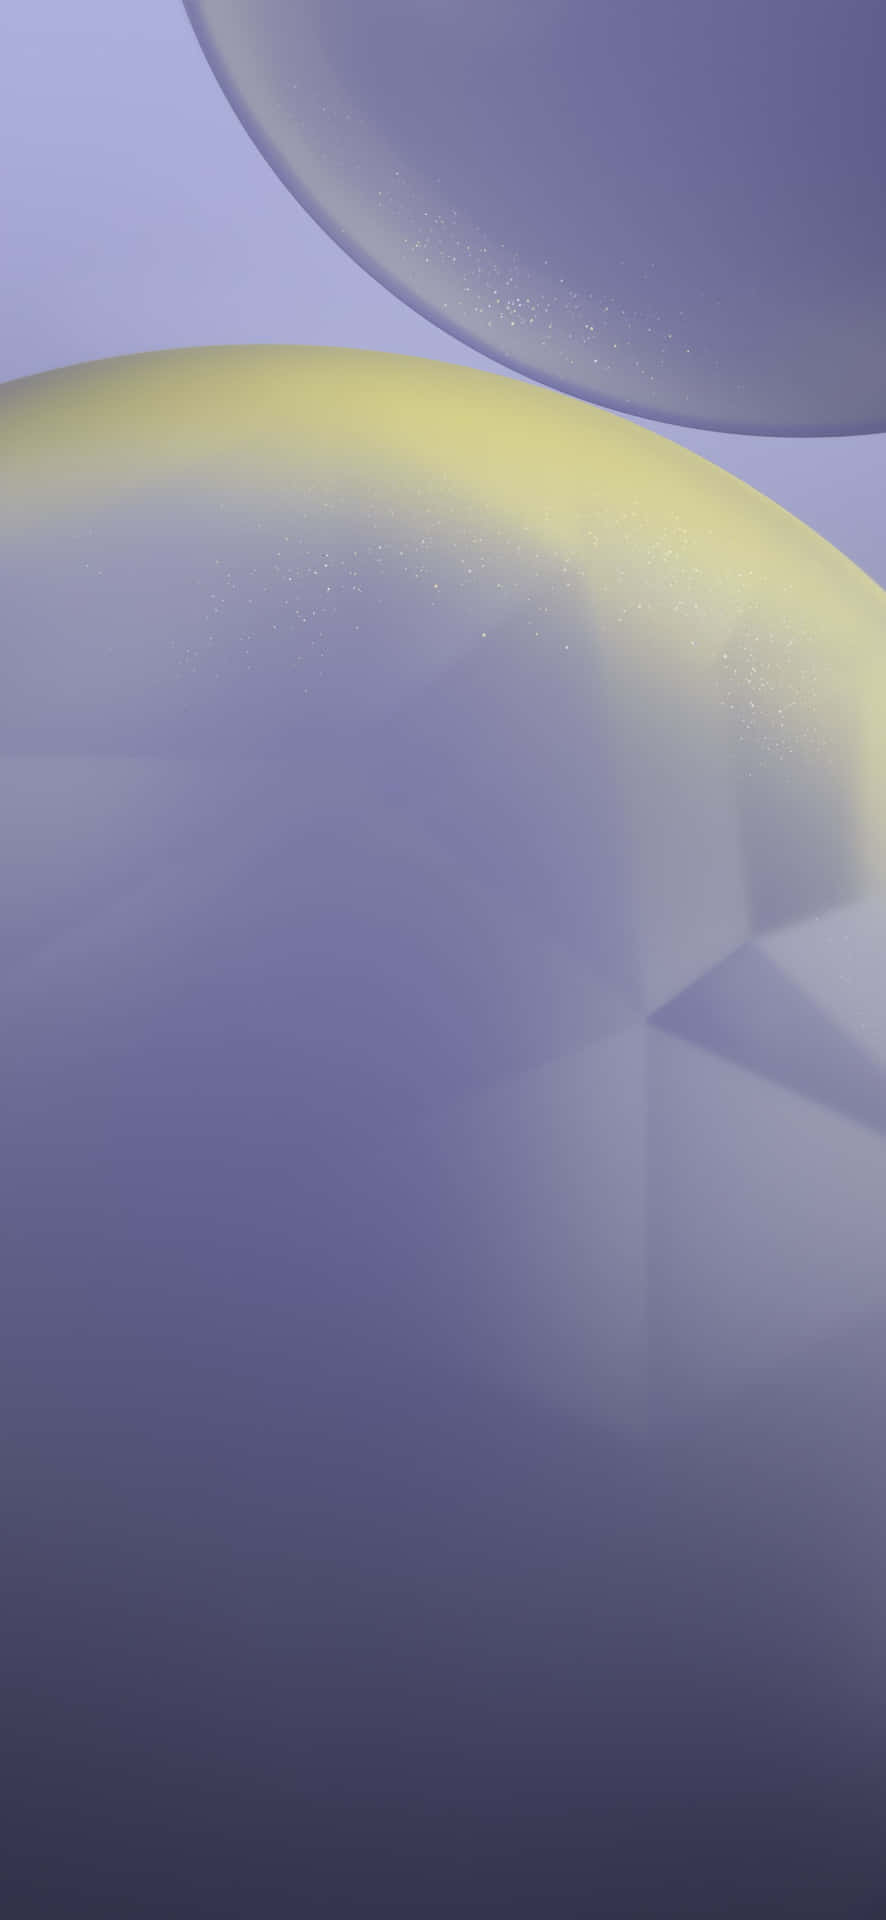 Abstract Purpleand Yellow Gradient Background Wallpaper